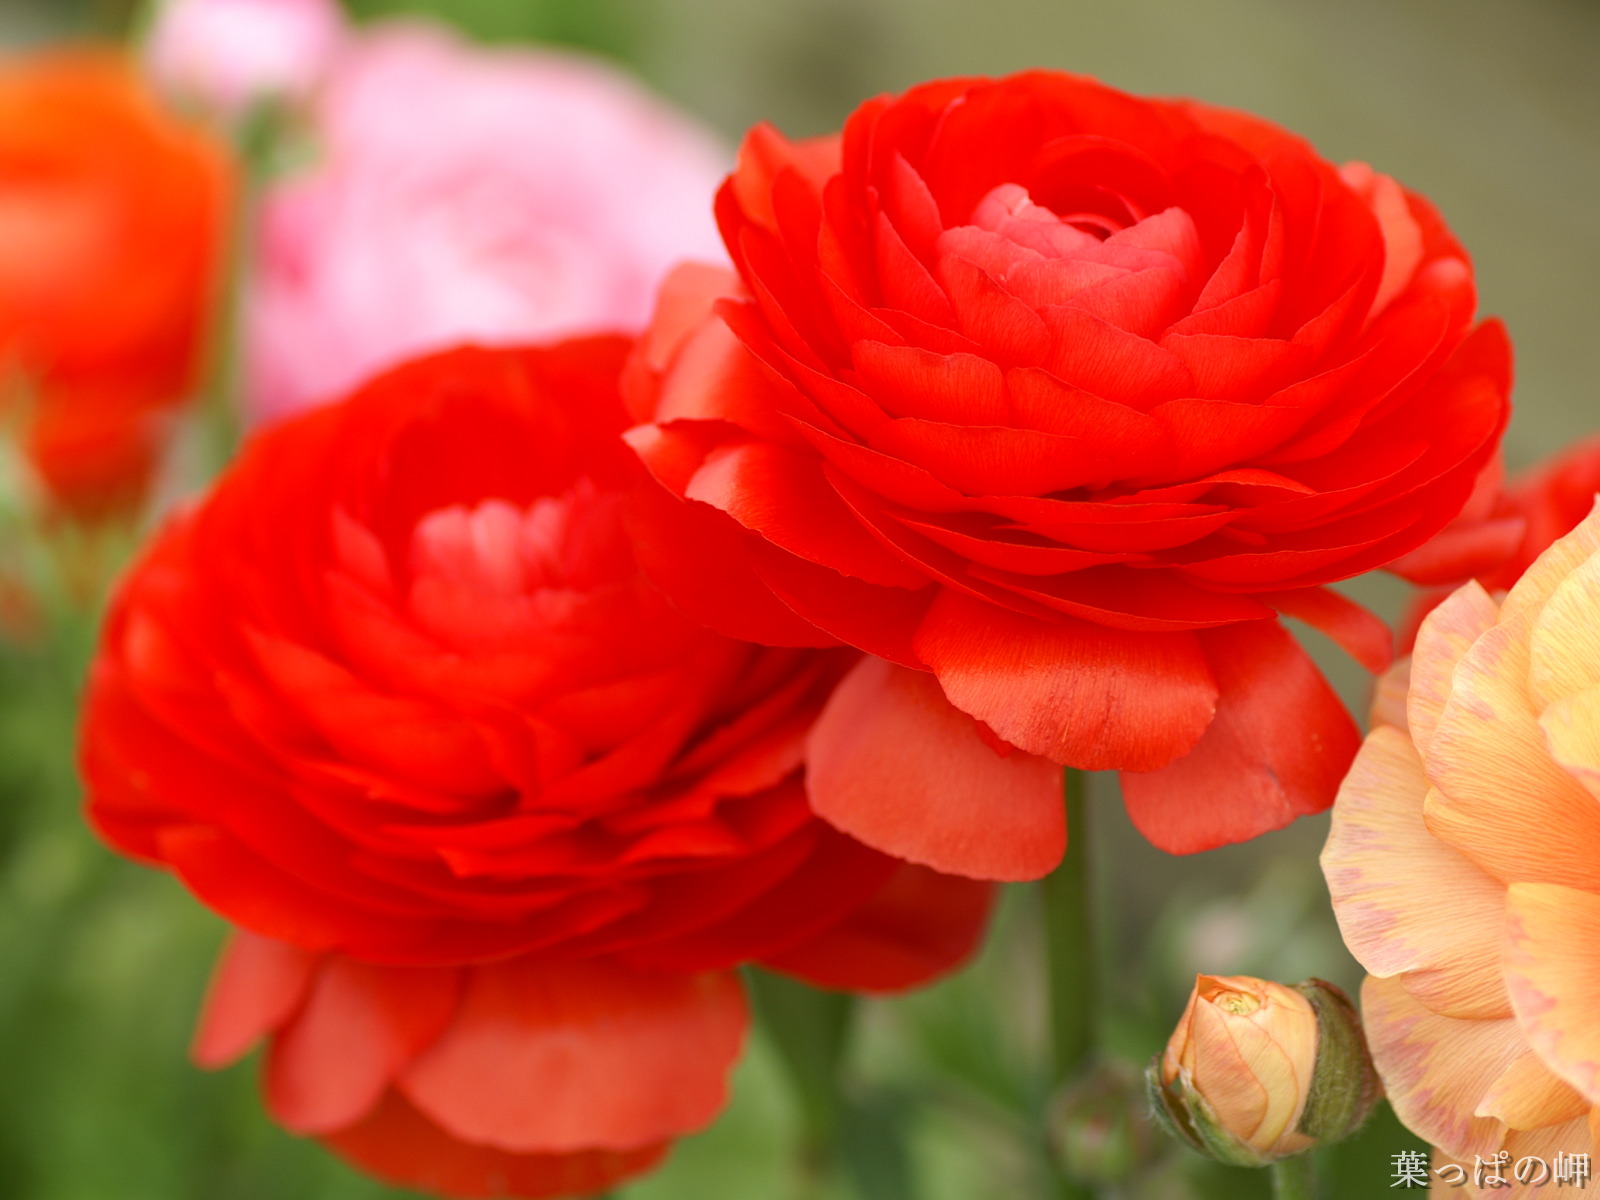 Red Flowers Pictures | HD Wallpapers Pulse